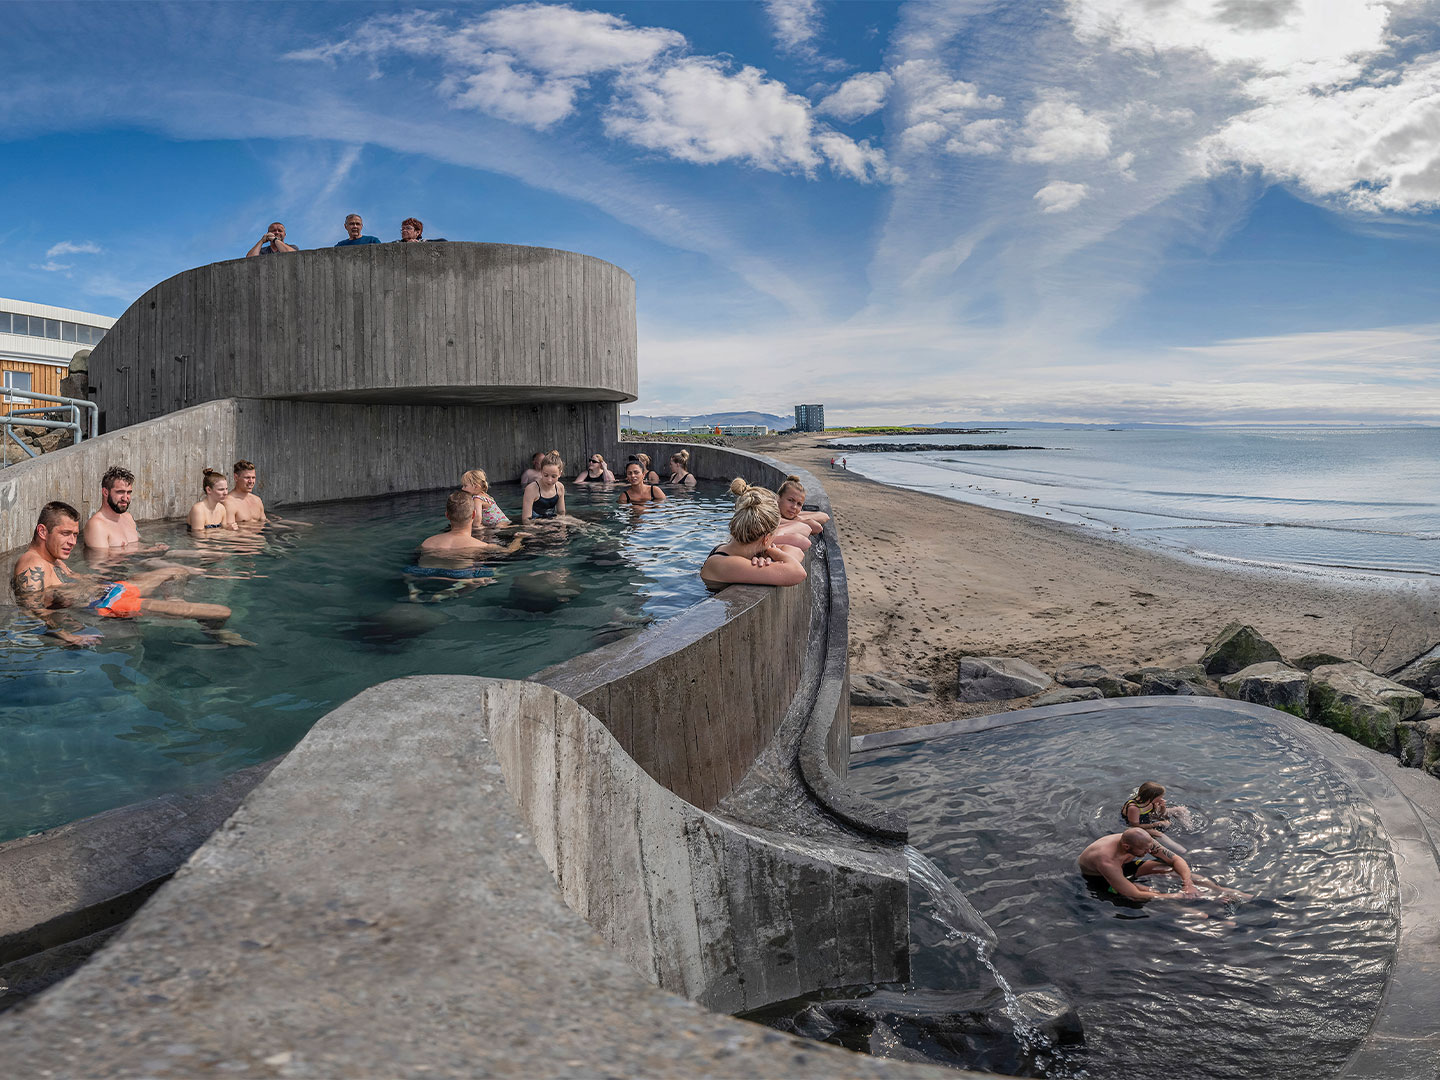 Guolaug baths in Iceland by Basalt Architects